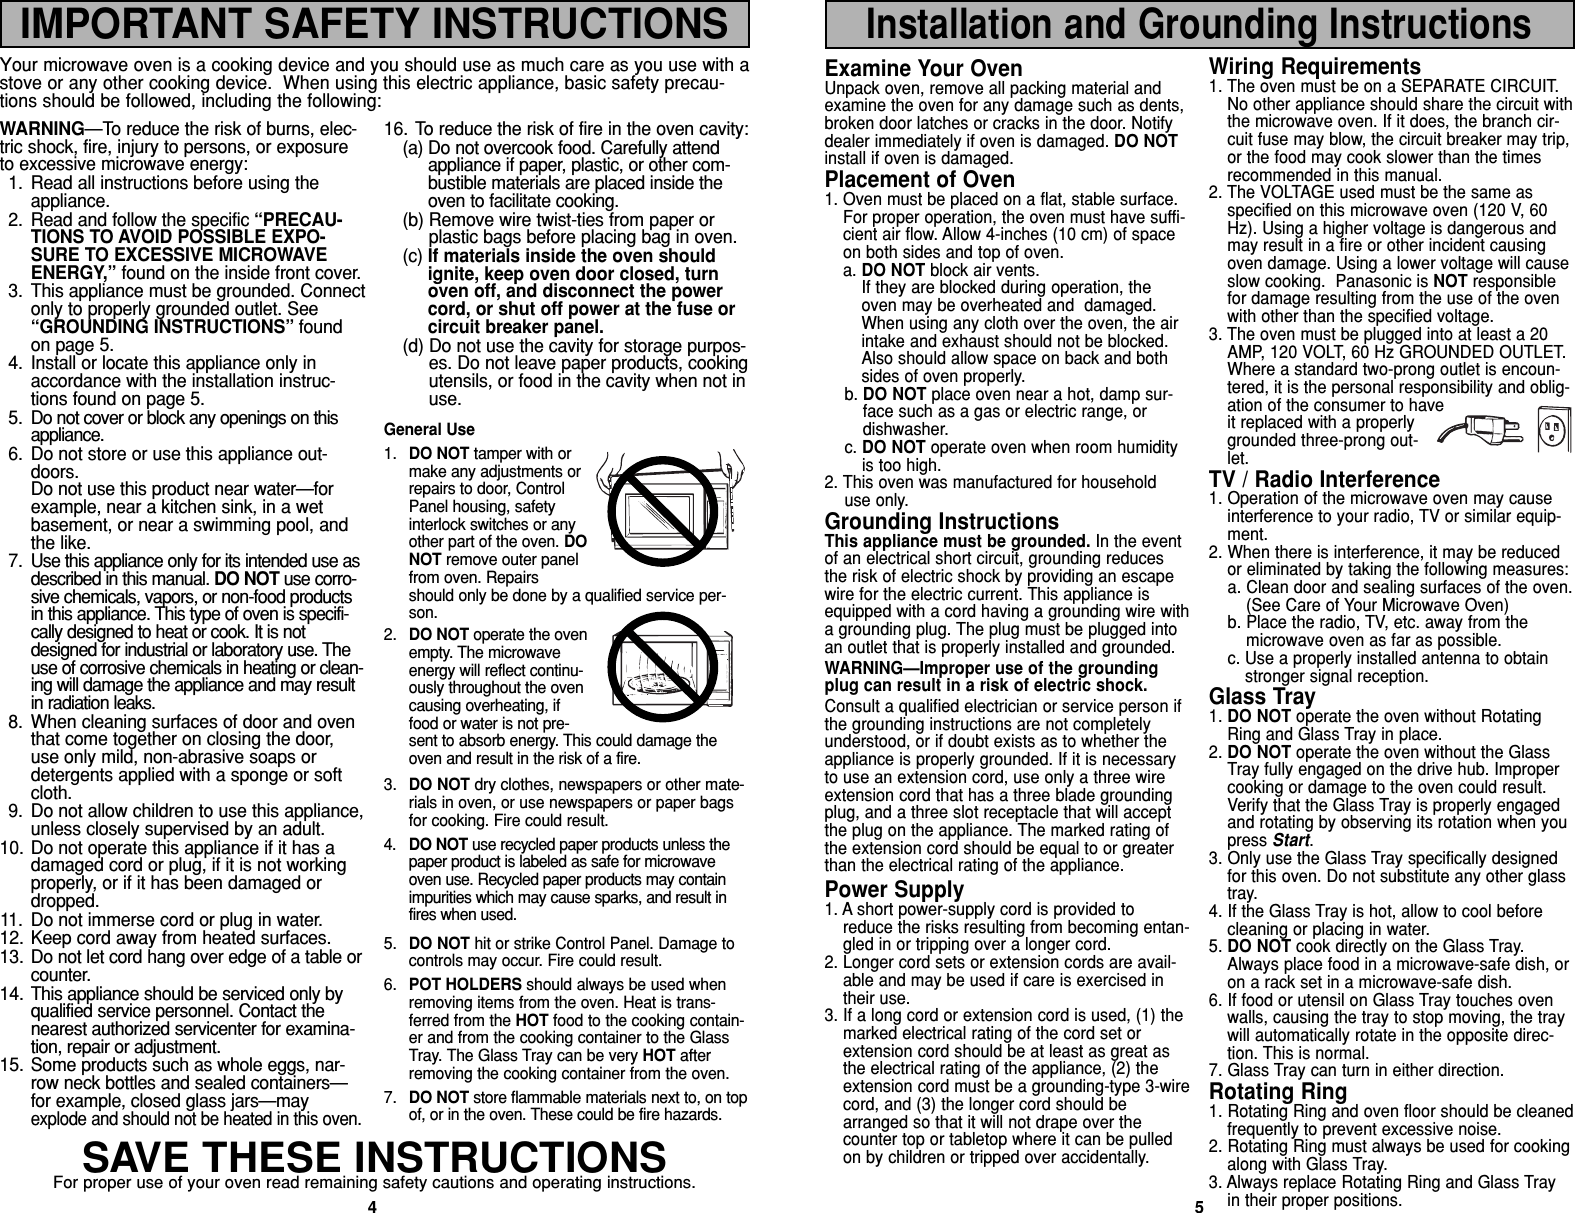 4WARNING—To reduce the risk of burns, elec-tric shock, fire, injury to persons, or exposureto excessive microwave energy:1. Read all instructions before using theappliance.2. Read and follow the specific “PRECAU-TIONS TO AVOID POSSIBLE EXPO-SURE TO EXCESSIVE MICROWAVEENERGY,” found on the inside front cover. 3. This appliance must be grounded. Connectonly to properly grounded outlet. See“GROUNDING INSTRUCTIONS” foundon page 5.4. Install or locate this appliance only inaccordance with the installation instruc-tions found on page 5.5. Do not cover or block any openings on thisappliance. 6. Do not store or use this appliance out-doors. Do not use this product near water—forexample, near a kitchen sink, in a wetbasement, or near a swimming pool, andthe like.7. Use this appliance only for its intended use asdescribed in this manual. DO NOT use corro-sive chemicals, vapors, or non-food productsin this appliance. This type of oven is specifi-cally designed to heat or cook. It is notdesigned for industrial or laboratory use. Theuse of corrosive chemicals in heating or clean-ing will damage the appliance and may resultin radiation leaks.8. When cleaning surfaces of door and oventhat come together on closing the door,use only mild, non-abrasive soaps ordetergents applied with a sponge or softcloth. 9. Do not allow children to use this appliance,unless closely supervised by an adult. 10. Do not operate this appliance if it has adamaged cord or plug, if it is not workingproperly, or if it has been damaged ordropped.11. Do not immerse cord or plug in water. 12. Keep cord away from heated surfaces.13. Do not let cord hang over edge of a table orcounter.14. This appliance should be serviced only byqualified service personnel. Contact thenearest authorized servicenter for examina-tion, repair or adjustment. 15. Some products such as whole eggs, nar-row neck bottles and sealed containers—for example, closed glass jars—mayexplode and should not be heated in this oven. 16. To reduce the risk of fire in the oven cavity:(a) Do not overcook food. Carefully attendappliance if paper, plastic, or other com-bustible materials are placed inside theoven to facilitate cooking.(b) Remove wire twist-ties from paper orplastic bags before placing bag in oven. (c) If materials inside the oven shouldignite, keep oven door closed, turnoven off, and disconnect the powercord, or shut off power at the fuse orcircuit breaker panel.(d) Do not use the cavity for storage purpos-es. Do not leave paper products, cookingutensils, or food in the cavity when not inuse.General Use1. DO NOT tamper with ormake any adjustments orrepairs to door, ControlPanel housing, safetyinterlock switches or anyother part of the oven. DONOT remove outer panelfrom oven. Repairsshould only be done by a qualified service per-son.2. DO NOT operate the ovenempty. The microwaveenergy will reflect continu-ously throughout the ovencausing overheating, iffood or water is not pre-sent to absorb energy. This could damage theoven and result in the risk of a fire.3. DO NOT dry clothes, newspapers or other mate-rials in oven, or use newspapers or paper bagsfor cooking. Fire could result. 4. DO NOT use recycled paper products unless thepaper product is labeled as safe for microwaveoven use. Recycled paper products may containimpurities which may cause sparks, and result infires when used. 5. DO NOT hit or strike Control Panel. Damage tocontrols may occur. Fire could result. 6. POT HOLDERS should always be used whenremoving items from the oven. Heat is trans-ferred from the HOT food to the cooking contain-er and from the cooking container to the GlassTray. The Glass Tray can be very HOT afterremoving the cooking container from the oven.7. DO NOT store flammable materials next to, on topof, or in the oven. These could be fire hazards.SAVE THESE INSTRUCTIONSFor proper use of your oven read remaining safety cautions and operating instructions.Your microwave oven is a cooking device and you should use as much care as you use with astove or any other cooking device.  When using this electric appliance, basic safety precau-tions should be followed, including the following:Examine Your OvenUnpack oven, remove all packing material andexamine the oven for any damage such as dents,broken door latches or cracks in the door. Notifydealer immediately if oven is damaged. DO NOTinstall if oven is damaged.Placement of Oven1. Oven must be placed on a flat, stable surface.For proper operation, the oven must have suffi-cient air flow. Allow 4-inches (10 cm) of spaceon both sides and top of oven.a. DO NOT block air vents.If they are blocked during operation, theoven may be overheated and  damaged.When using any cloth over the oven, the airintake and exhaust should not be blocked.Also should allow space on back and bothsides of oven properly. b. DO NOT place oven near a hot, damp sur-face such as a gas or electric range, ordishwasher.c. DO NOT operate oven when room humidityis too high.2. This oven was manufactured for household      use only.Grounding InstructionsThis appliance must be grounded. In the eventof an electrical short circuit, grounding reducesthe risk of electric shock by providing an escapewire for the electric current. This appliance isequipped with a cord having a grounding wire witha grounding plug. The plug must be plugged intoan outlet that is properly installed and grounded.WARNING—Improper use of the groundingplug can result in a risk of electric shock.Consult a qualified electrician or service person ifthe grounding instructions are not completelyunderstood, or if doubt exists as to whether theappliance is properly grounded. If it is necessaryto use an extension cord, use only a three wireextension cord that has a three blade groundingplug, and a three slot receptacle that will acceptthe plug on the appliance. The marked rating ofthe extension cord should be equal to or greaterthan the electrical rating of the appliance.Power Supply1. A short power-supply cord is provided toreduce the risks resulting from becoming entan-gled in or tripping over a longer cord.2. Longer cord sets or extension cords are avail-able and may be used if care is exercised intheir use.3. If a long cord or extension cord is used, (1) themarked electrical rating of the cord set orextension cord should be at least as great asthe electrical rating of the appliance, (2) theextension cord must be a grounding-type 3-wirecord, and (3) the longer cord should bearranged so that it will not drape over thecounter top or tabletop where it can be pulledon by children or tripped over accidentally.Wiring Requirements1. The oven must be on a SEPARATE CIRCUIT.No other appliance should share the circuit withthe microwave oven. If it does, the branch cir-cuit fuse may blow, the circuit breaker may trip,or the food may cook slower than the timesrecommended in this manual.2. The VOLTAGE used must be the same asspecified on this microwave oven (120 V, 60Hz). Using a higher voltage is dangerous andmay result in a fire or other incident causingoven damage. Using a lower voltage will causeslow cooking.  Panasonic is NOT responsiblefor damage resulting from the use of the ovenwith other than the specified voltage.3. The oven must be plugged into at least a 20AMP, 120 VOLT, 60 Hz GROUNDED OUTLET.Where a standard two-prong outlet is encoun-tered, it is the personal responsibility and oblig-ation of the consumer to haveit replaced with a properlygrounded three-prong out-let.TV / Radio Interference1. Operation of the microwave oven may causeinterference to your radio, TV or similar equip-ment.2. When there is interference, it may be reducedor eliminated by taking the following measures:a. Clean door and sealing surfaces of the oven.(See Care of Your Microwave Oven) b. Place the radio, TV, etc. away from themicrowave oven as far as possible. c. Use a properly installed antenna to obtainstronger signal reception.Glass Tray1. DO NOT operate the oven without RotatingRing and Glass Tray in place.2. DO NOT operate the oven without the GlassTray fully engaged on the drive hub. Impropercooking or damage to the oven could result.Verify that the Glass Tray is properly engagedand rotating by observing its rotation when youpress Start.3. Only use the Glass Tray specifically designedfor this oven. Do not substitute any other glasstray.4. If the Glass Tray is hot, allow to cool beforecleaning or placing in water.5. DO NOT cook directly on the Glass Tray.Always place food in a microwave-safe dish, oron a rack set in a microwave-safe dish.6. If food or utensil on Glass Tray touches ovenwalls, causing the tray to stop moving, the traywill automatically rotate in the opposite direc-tion. This is normal.7. Glass Tray can turn in either direction.Rotating Ring1. Rotating Ring and oven floor should be cleanedfrequently to prevent excessive noise.2. Rotating Ring must always be used for cookingalong with Glass Tray.3. Always replace Rotating Ring and Glass Trayin their proper positions.5IMPORTANT SAFETY INSTRUCTIONSInstallation and Grounding Instructions